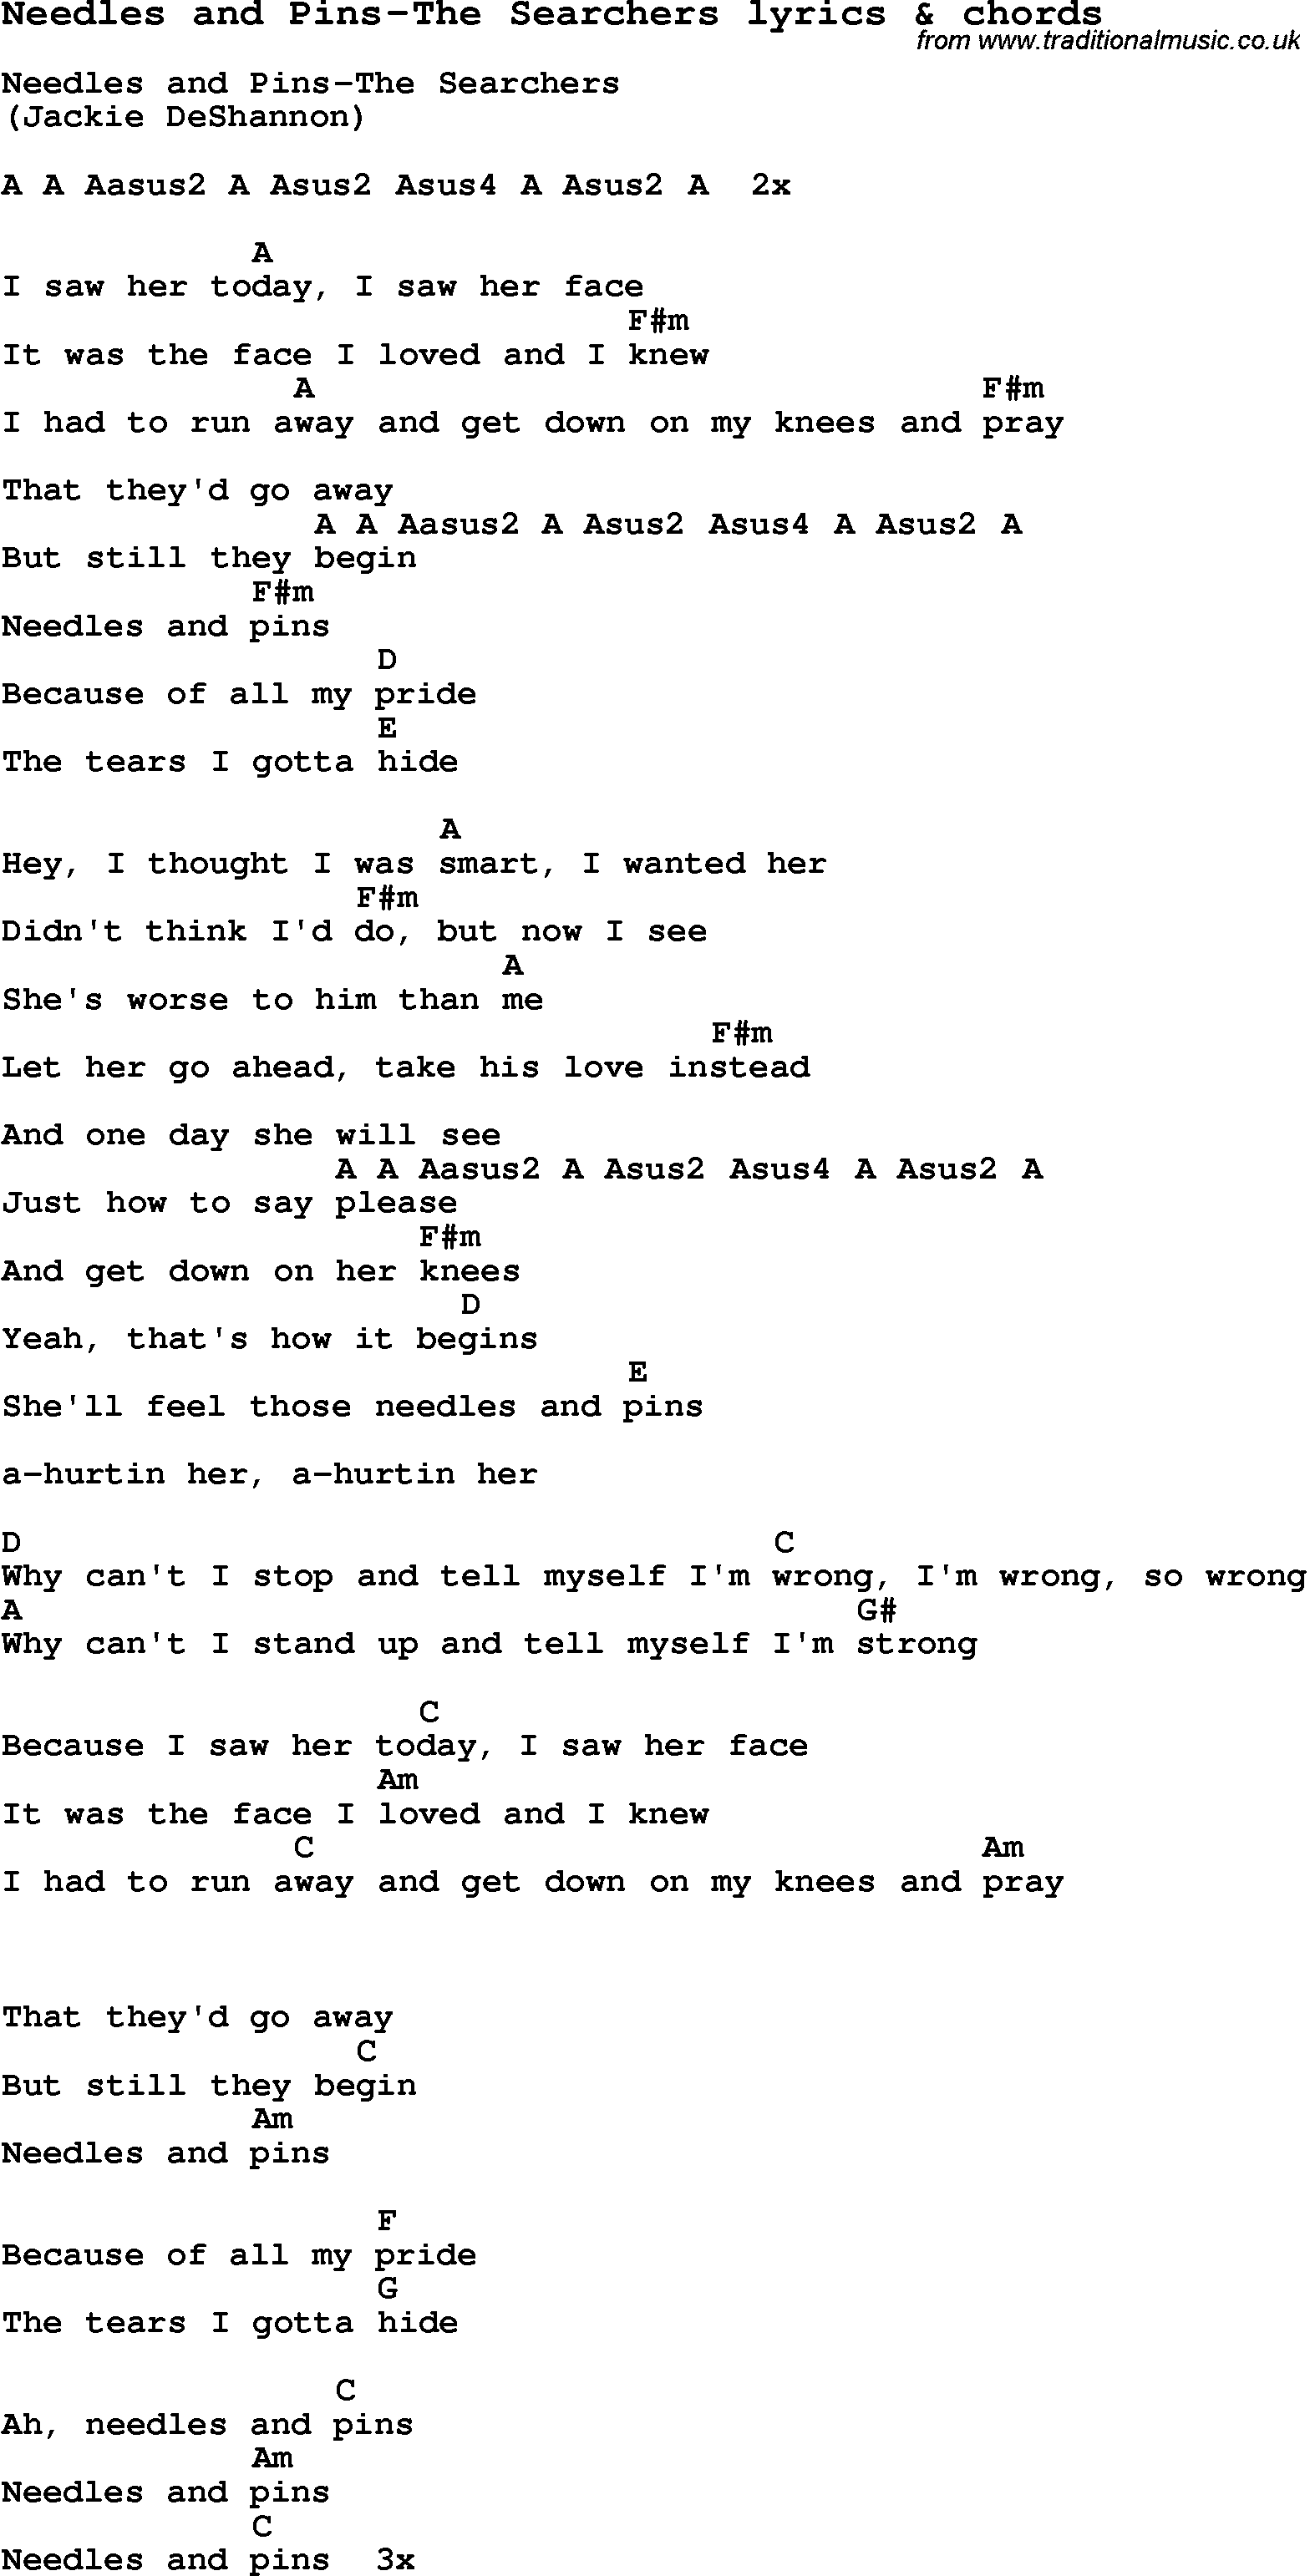 Love Song Lyrics for: Needles and Pins-The Searchers with chords for Ukulele, Guitar Banjo etc.